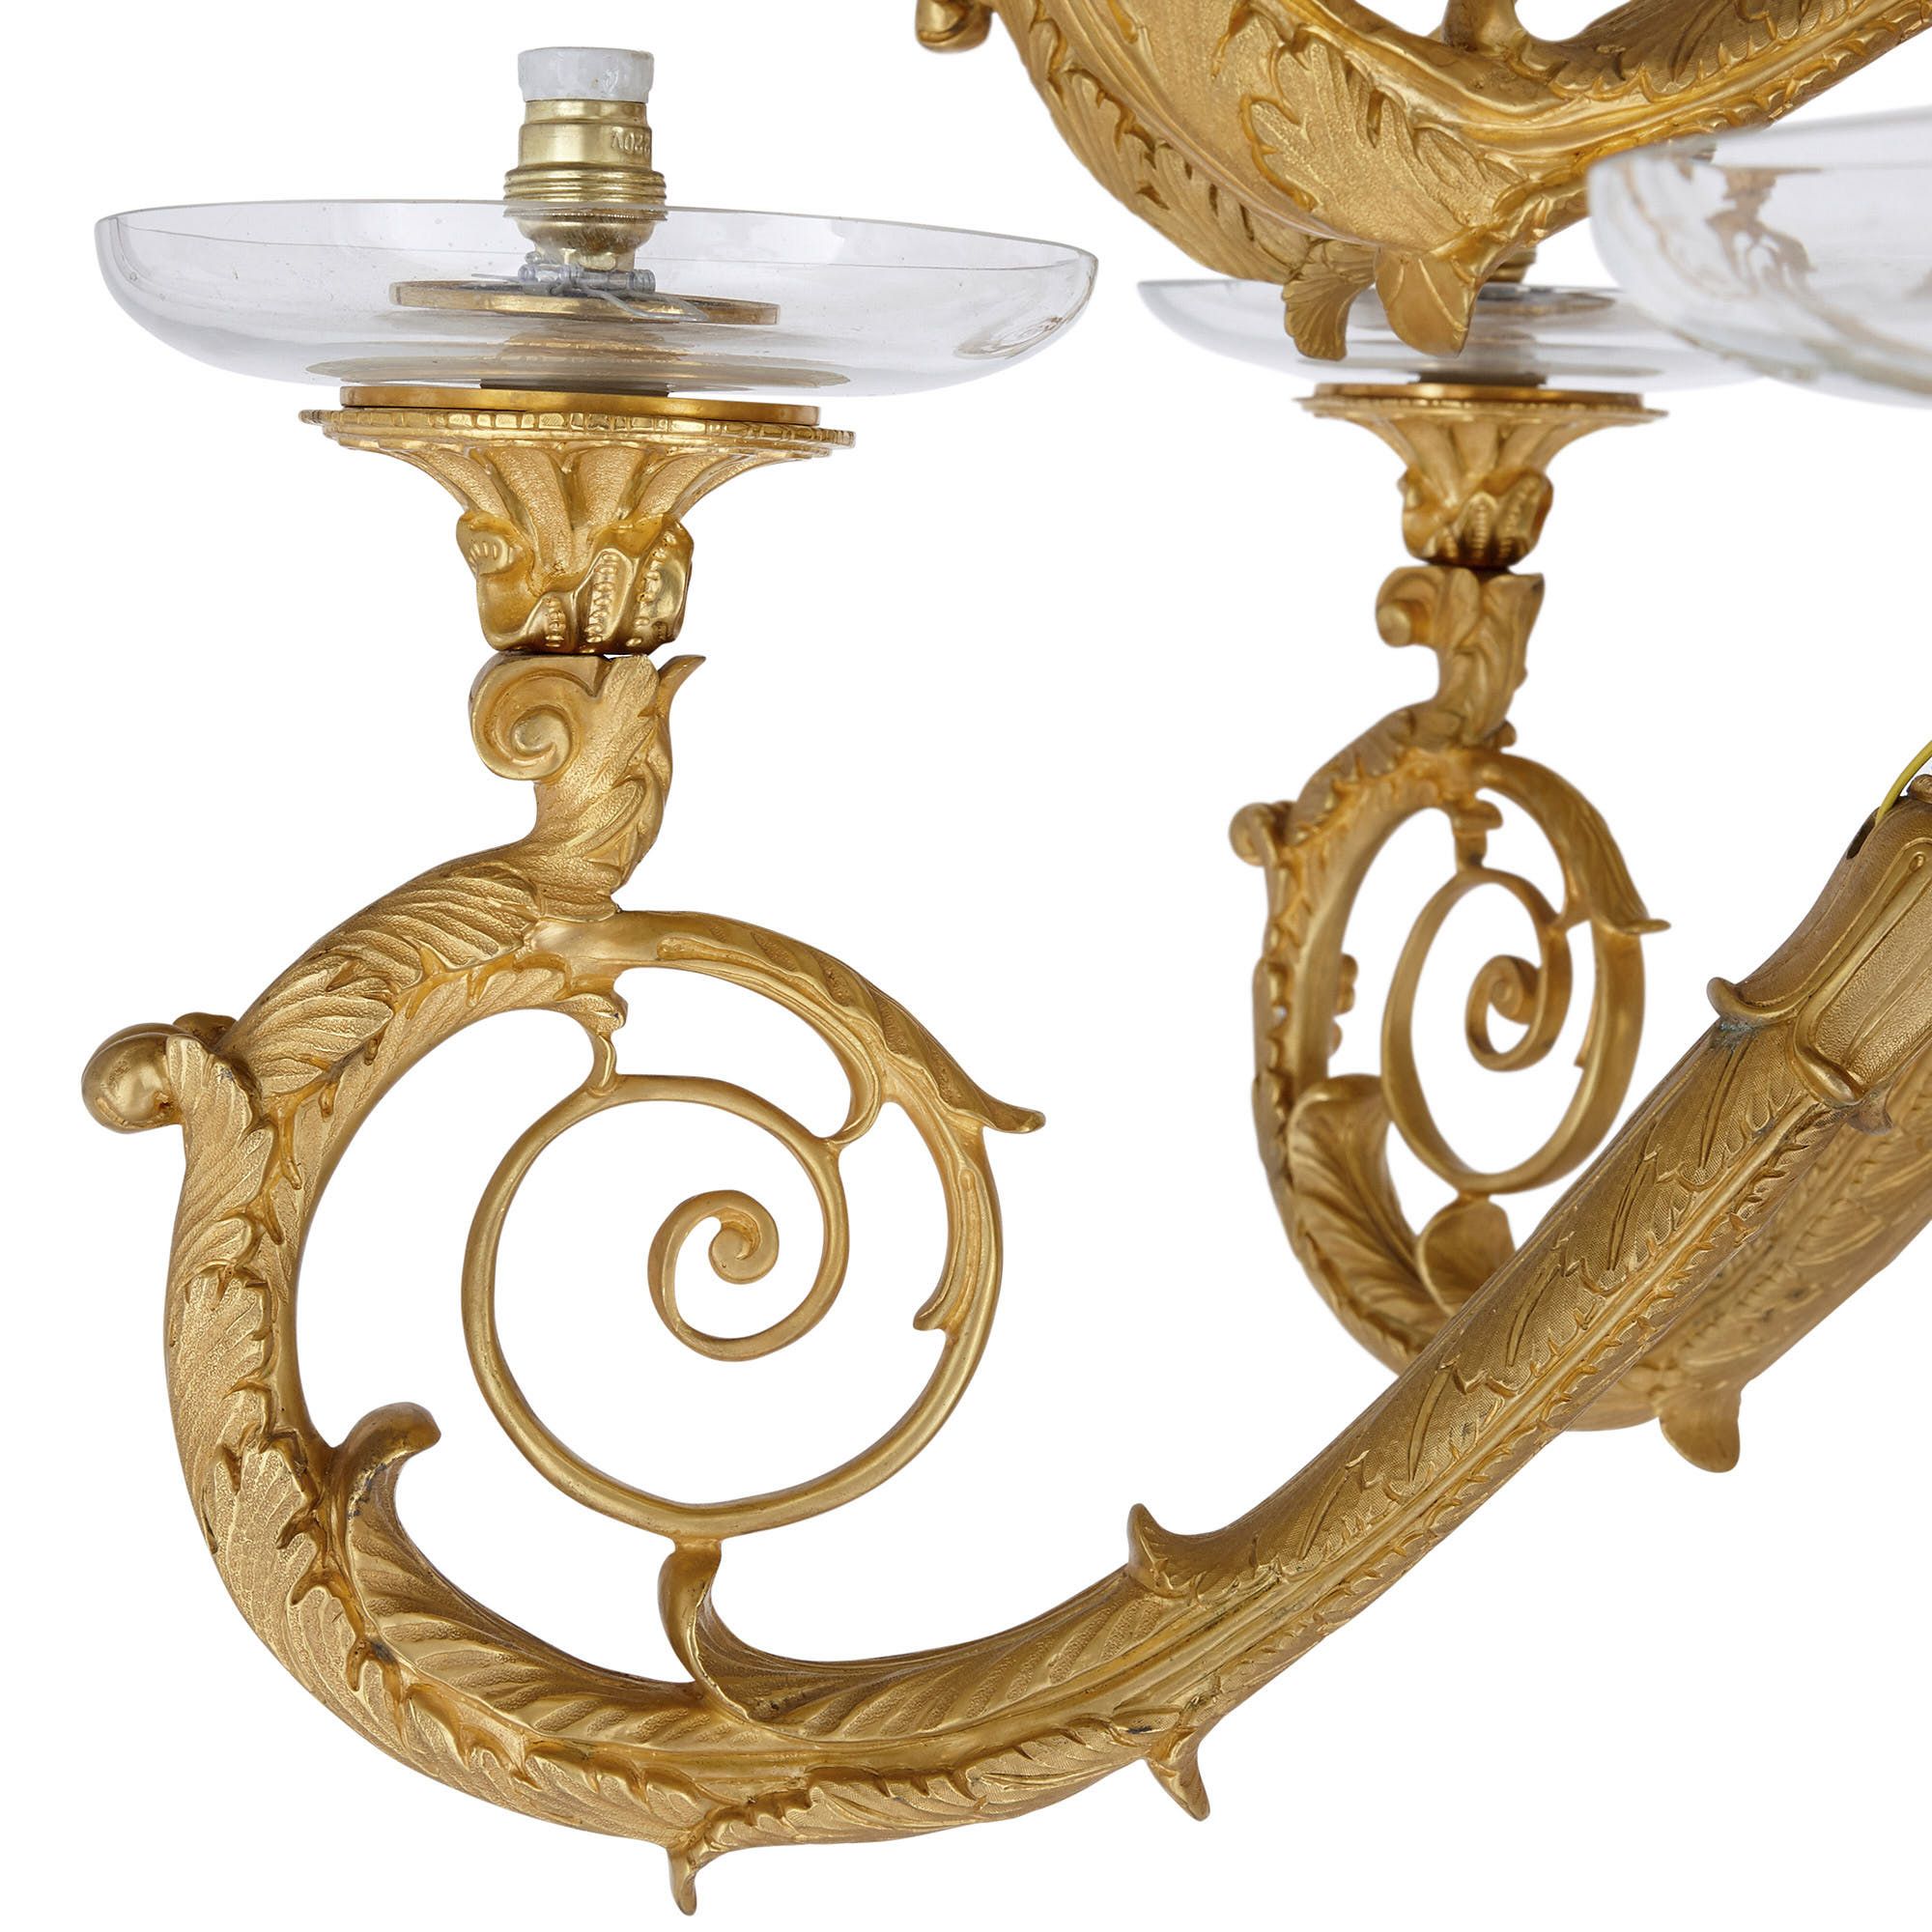 Pair of very large ormolu and cut glass candelabra | Mayfair Gallery